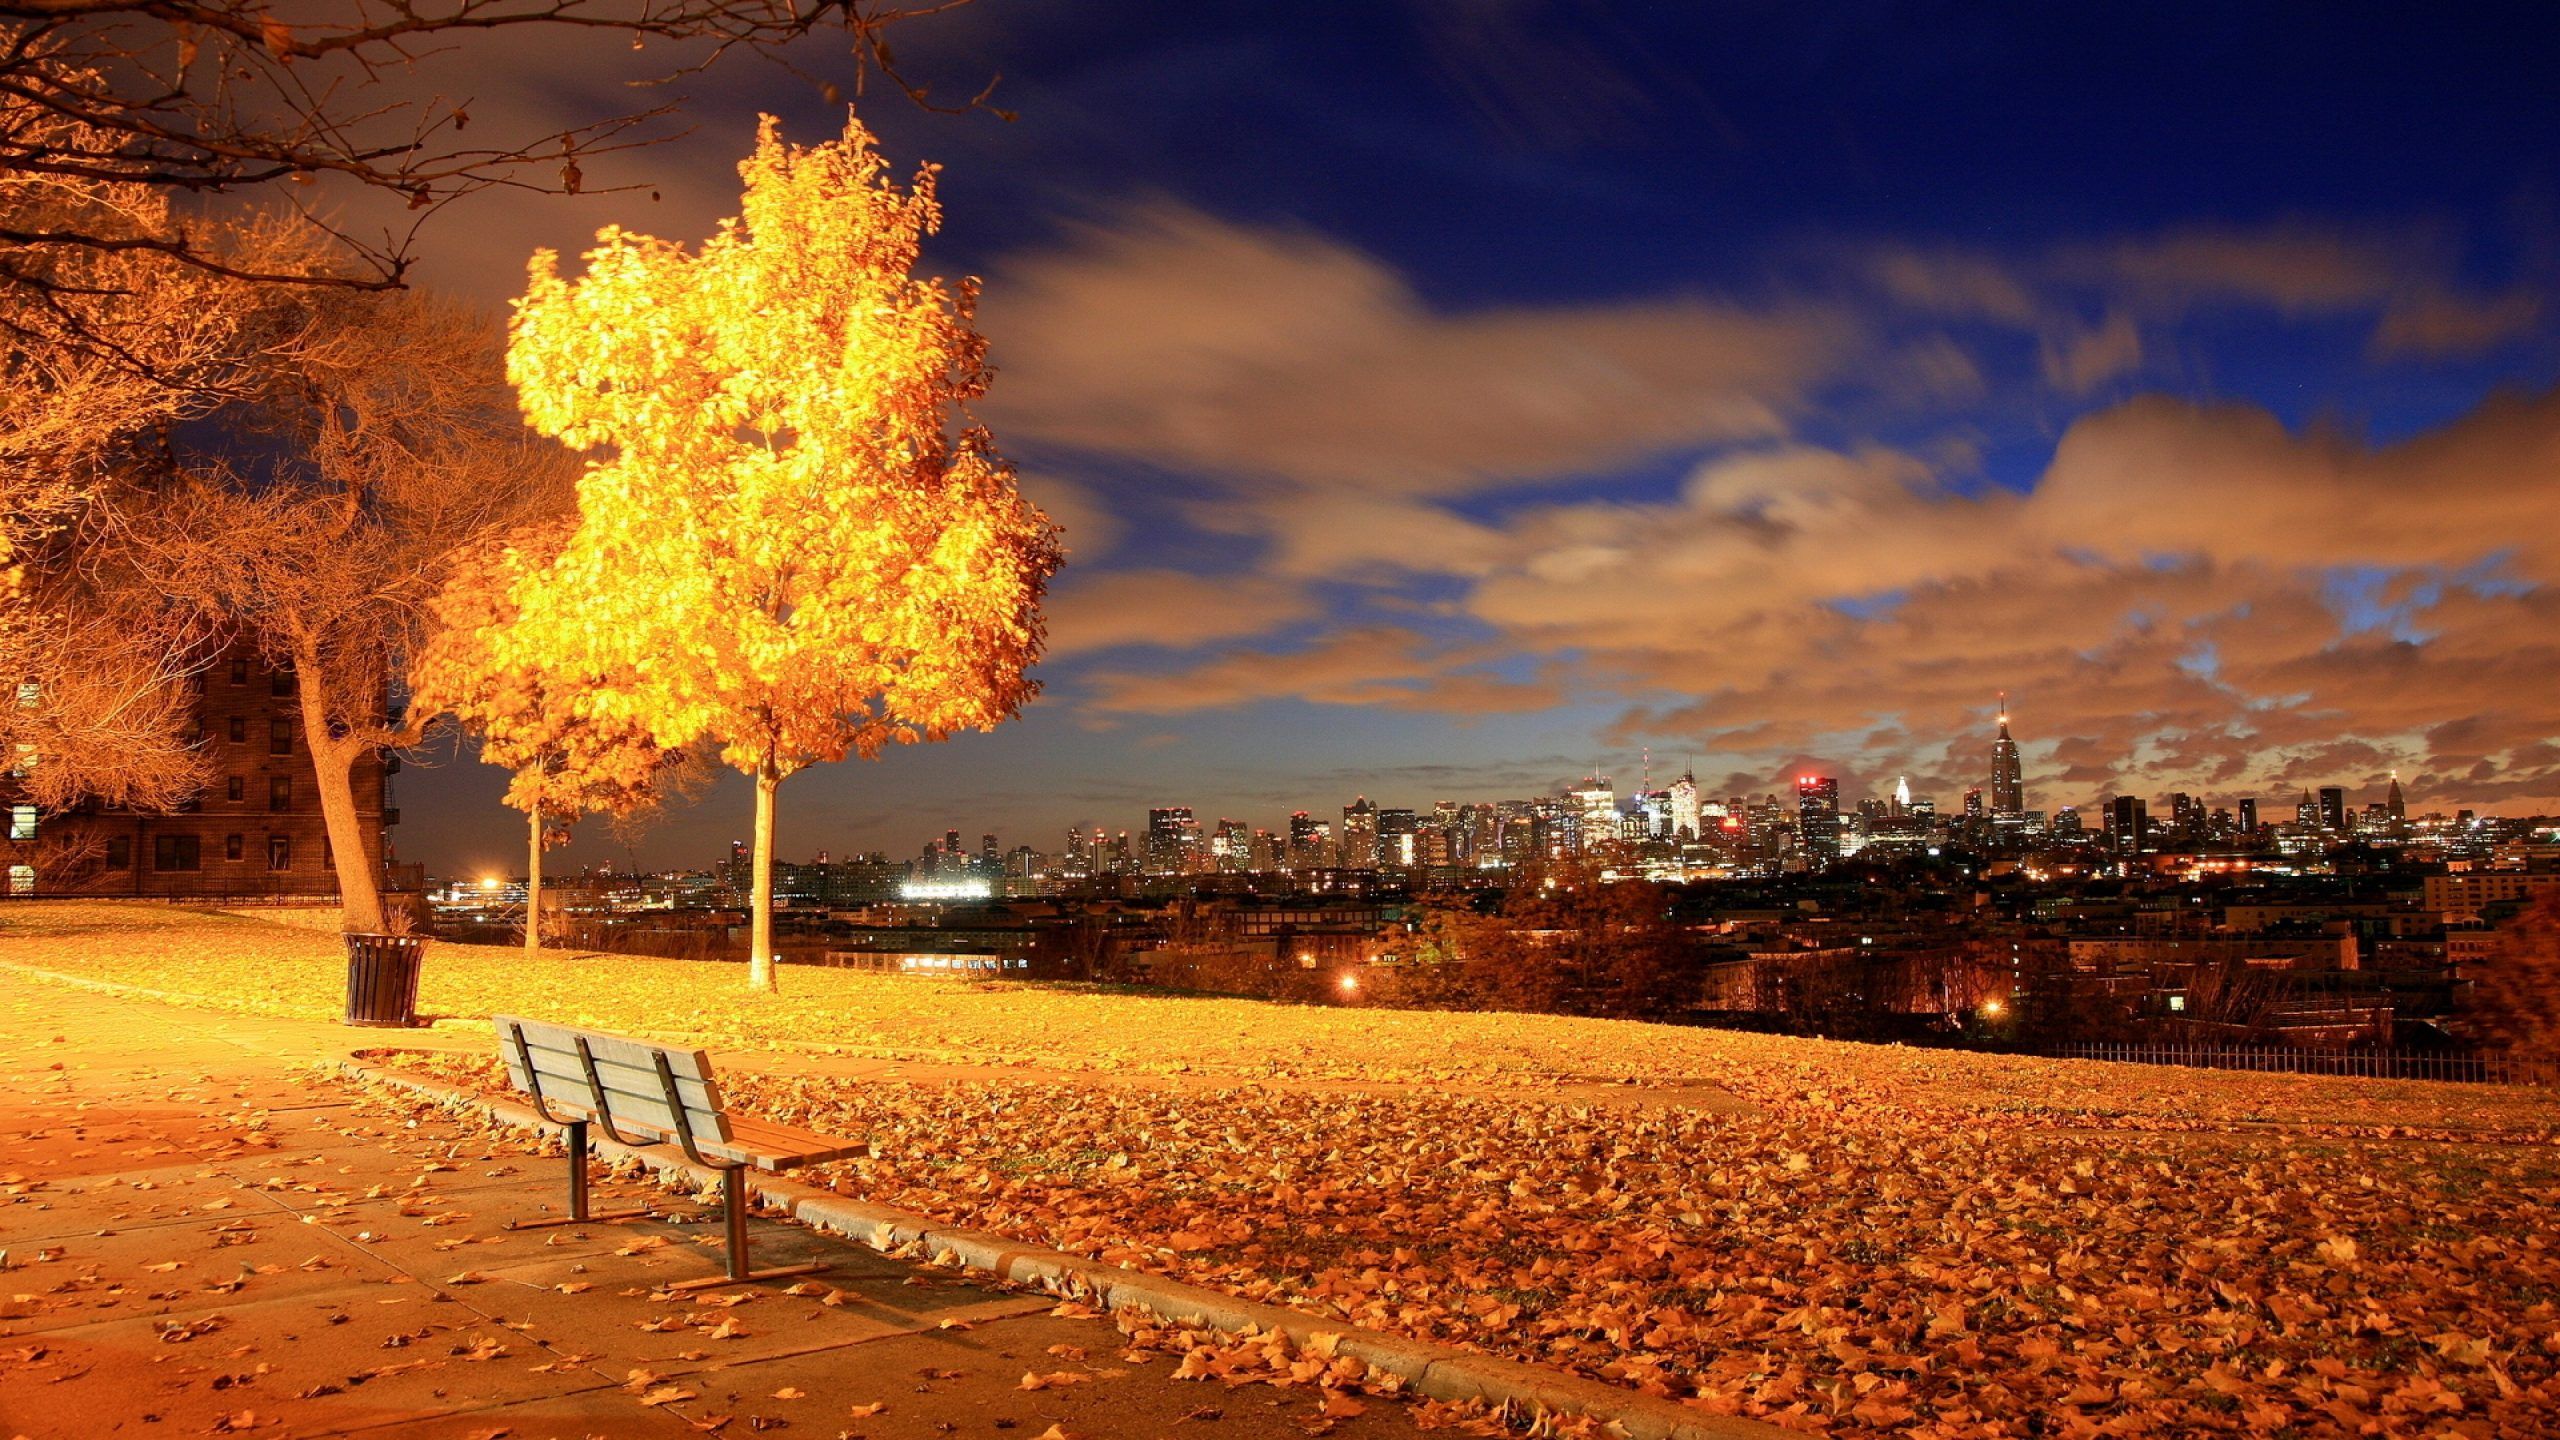 A park bench overlooking a city at night - Fall